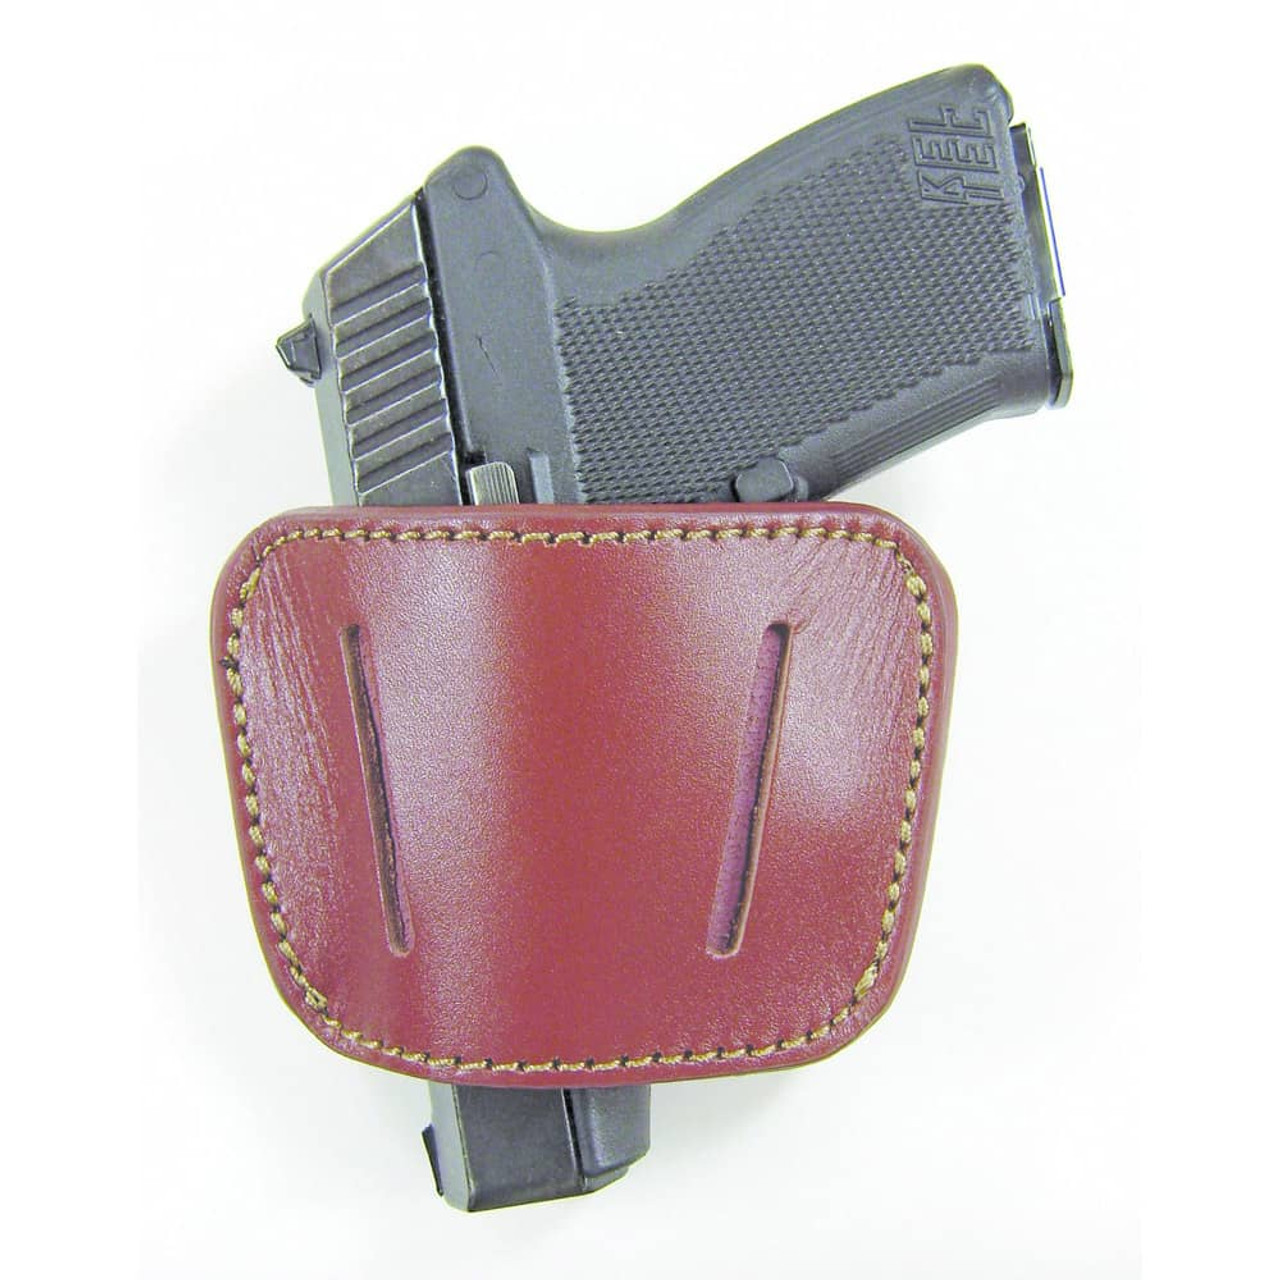  Zap Black Genuine Leather Concealed Carry Badge